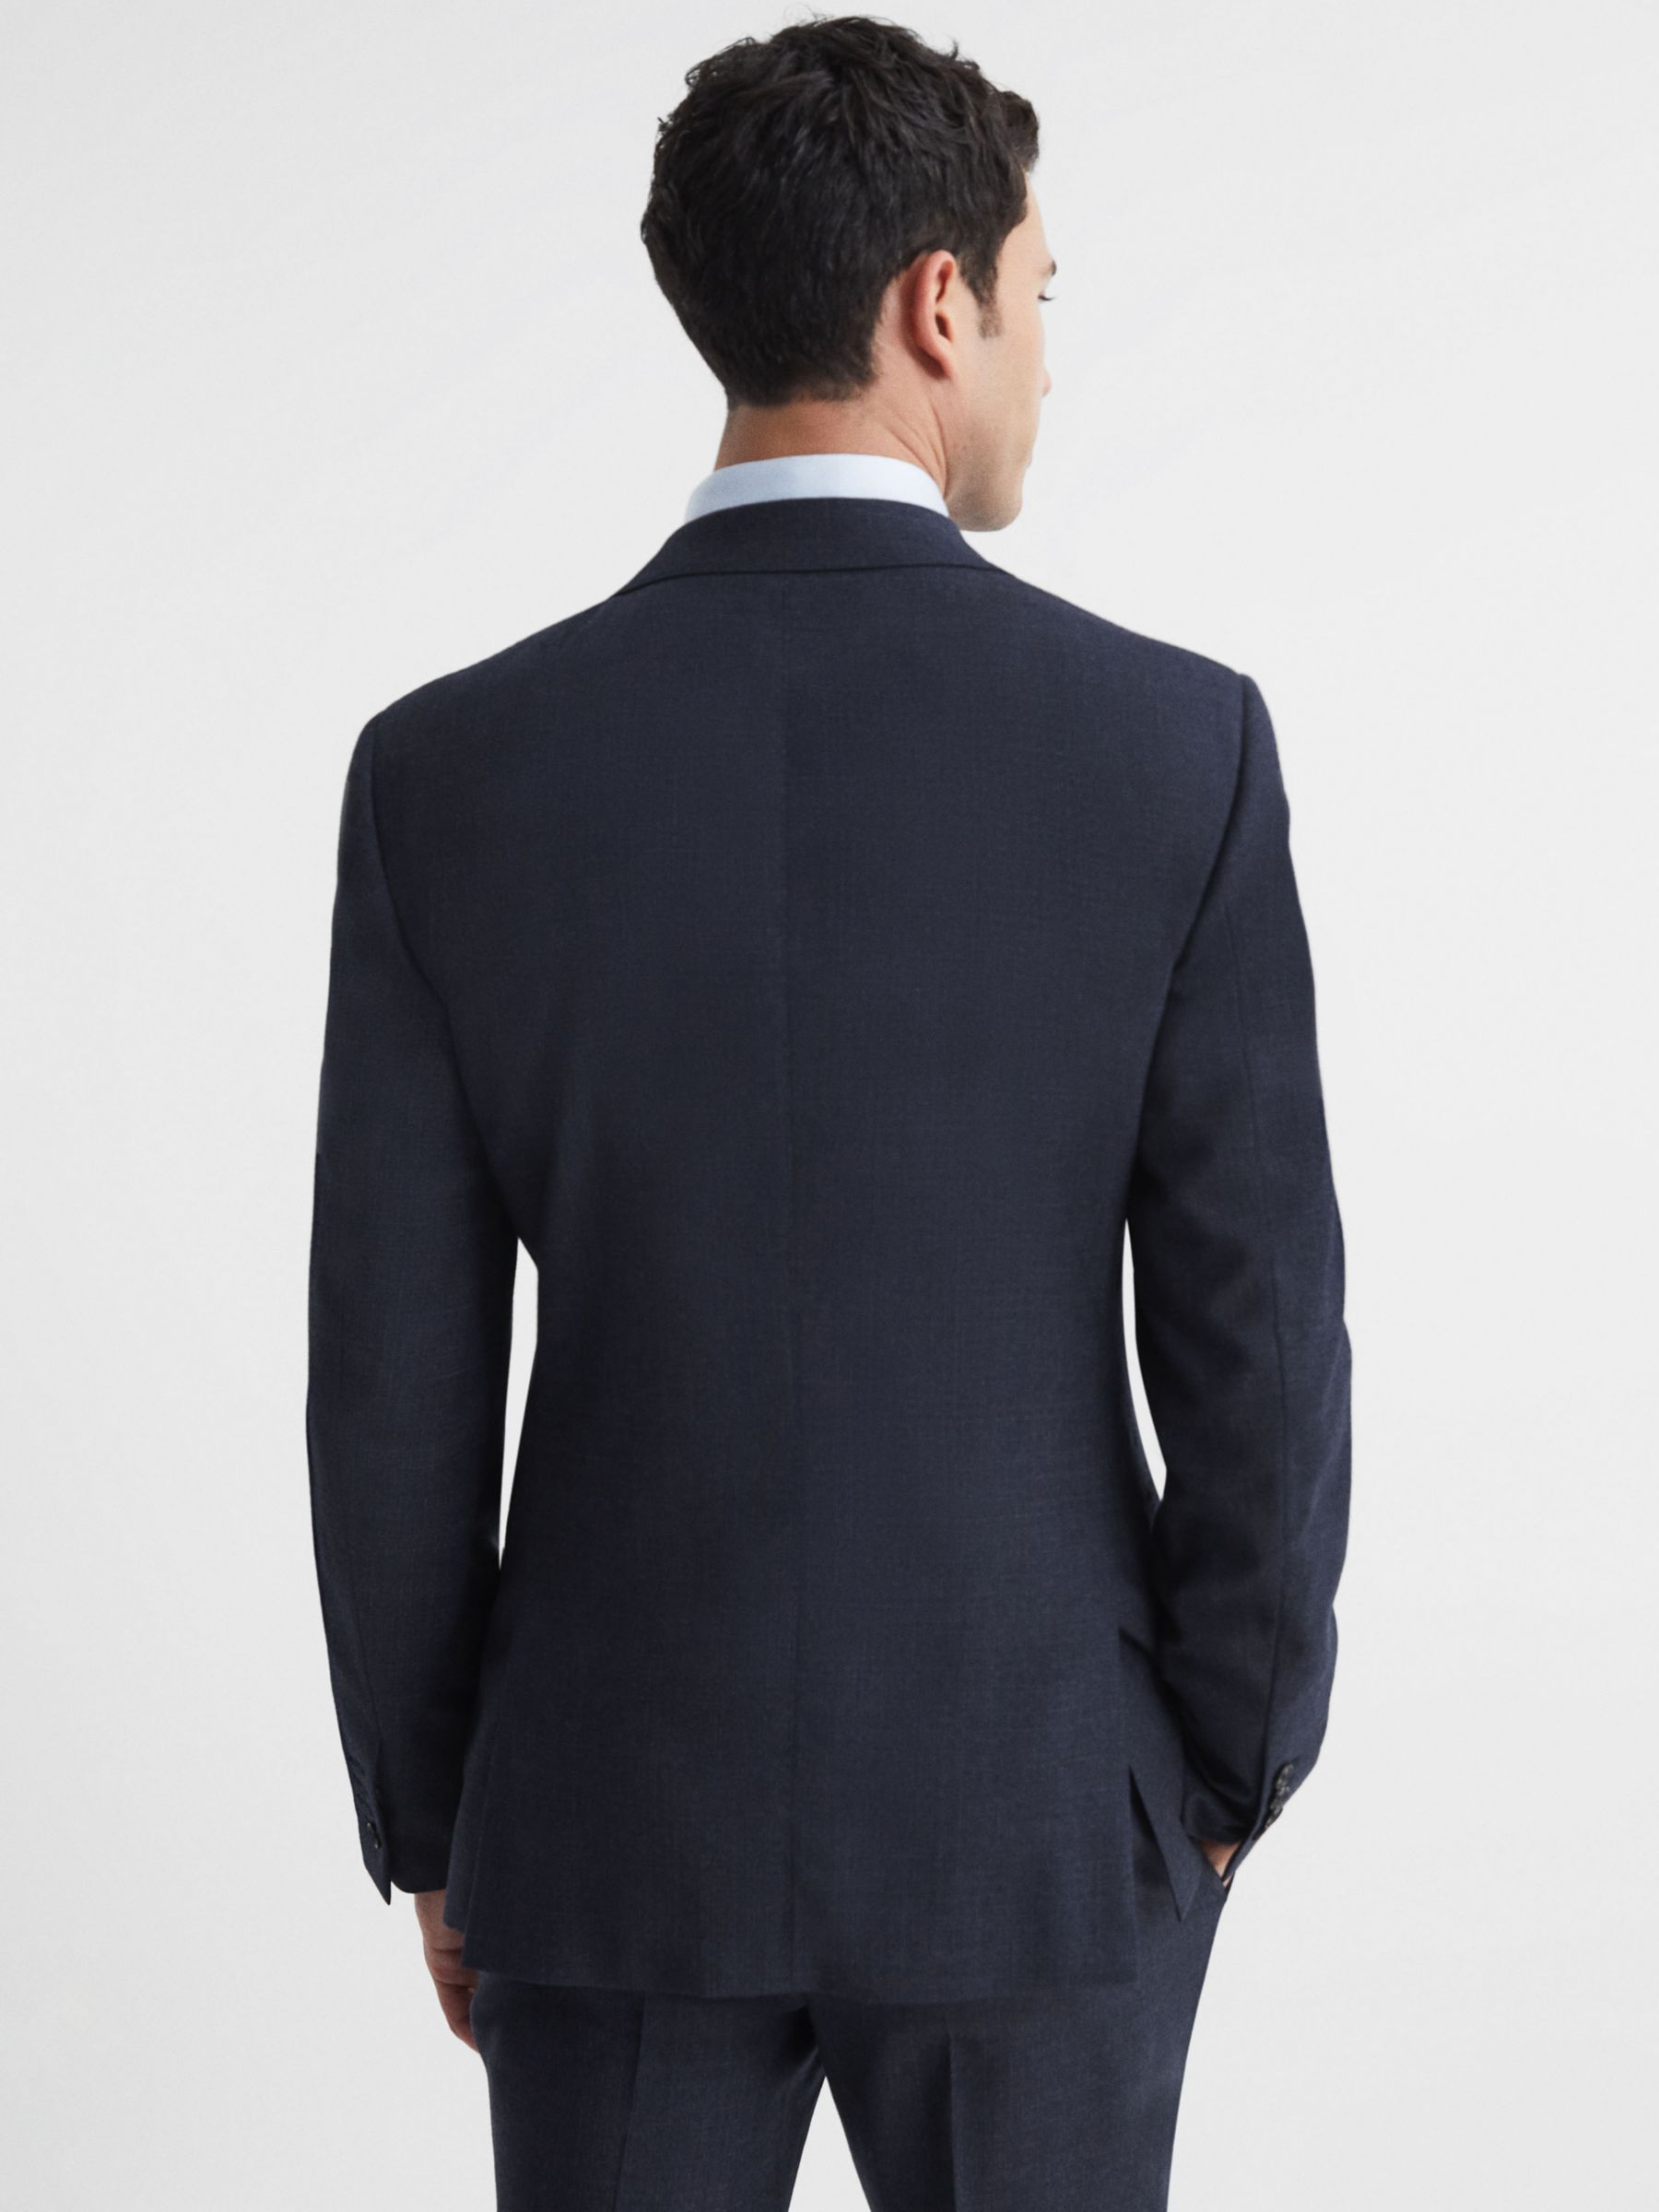 Reiss Dunn Textured Wool Tailored Fit Suit Jacket, Navy at John Lewis ...